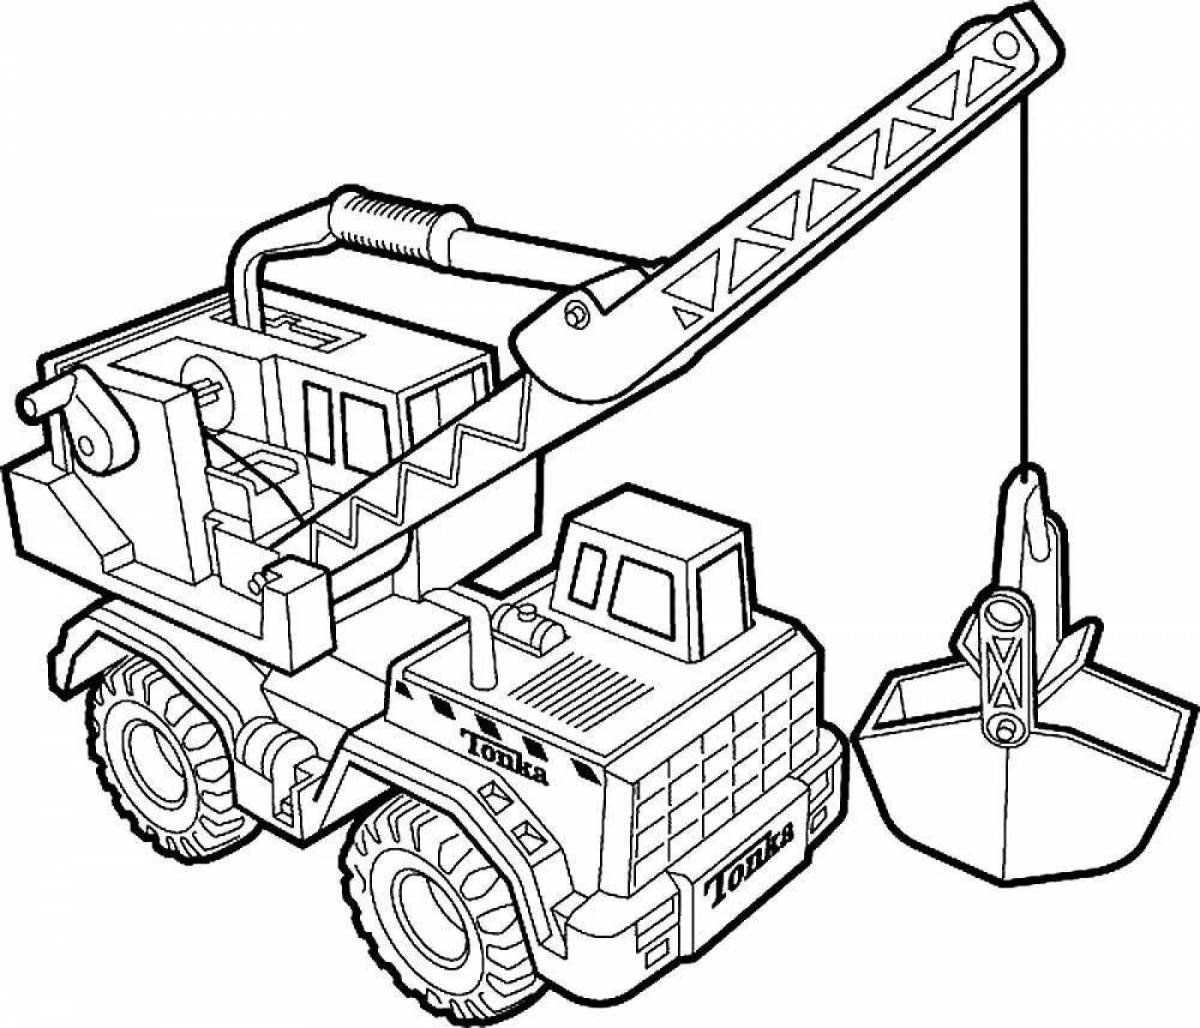 Joyful drill coloring page